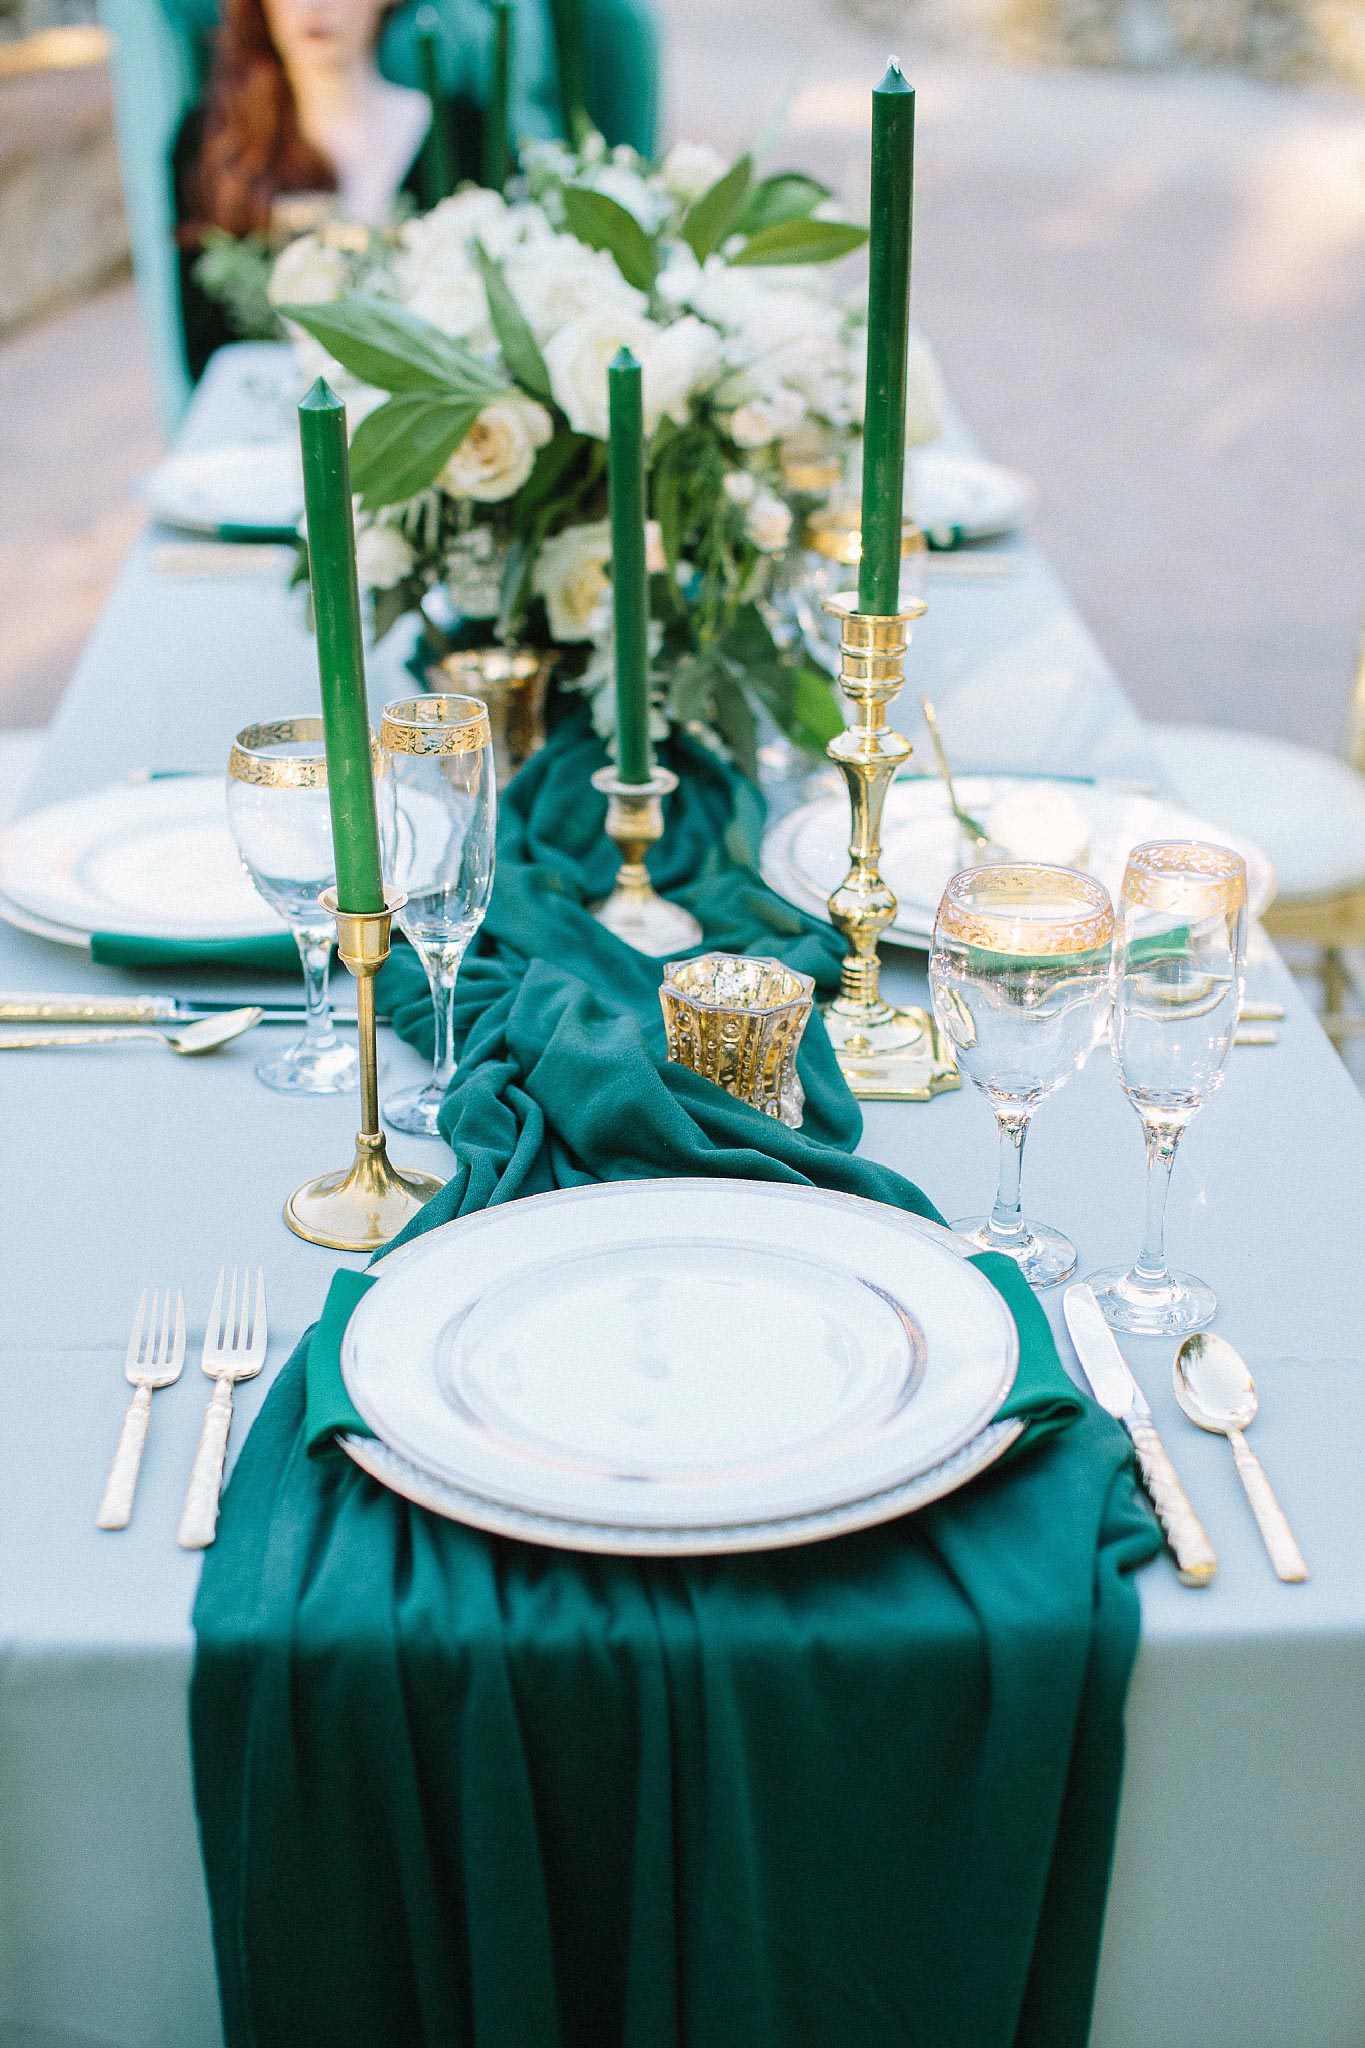 aristide mansfield wedding grey reception table with green runner and gold plates